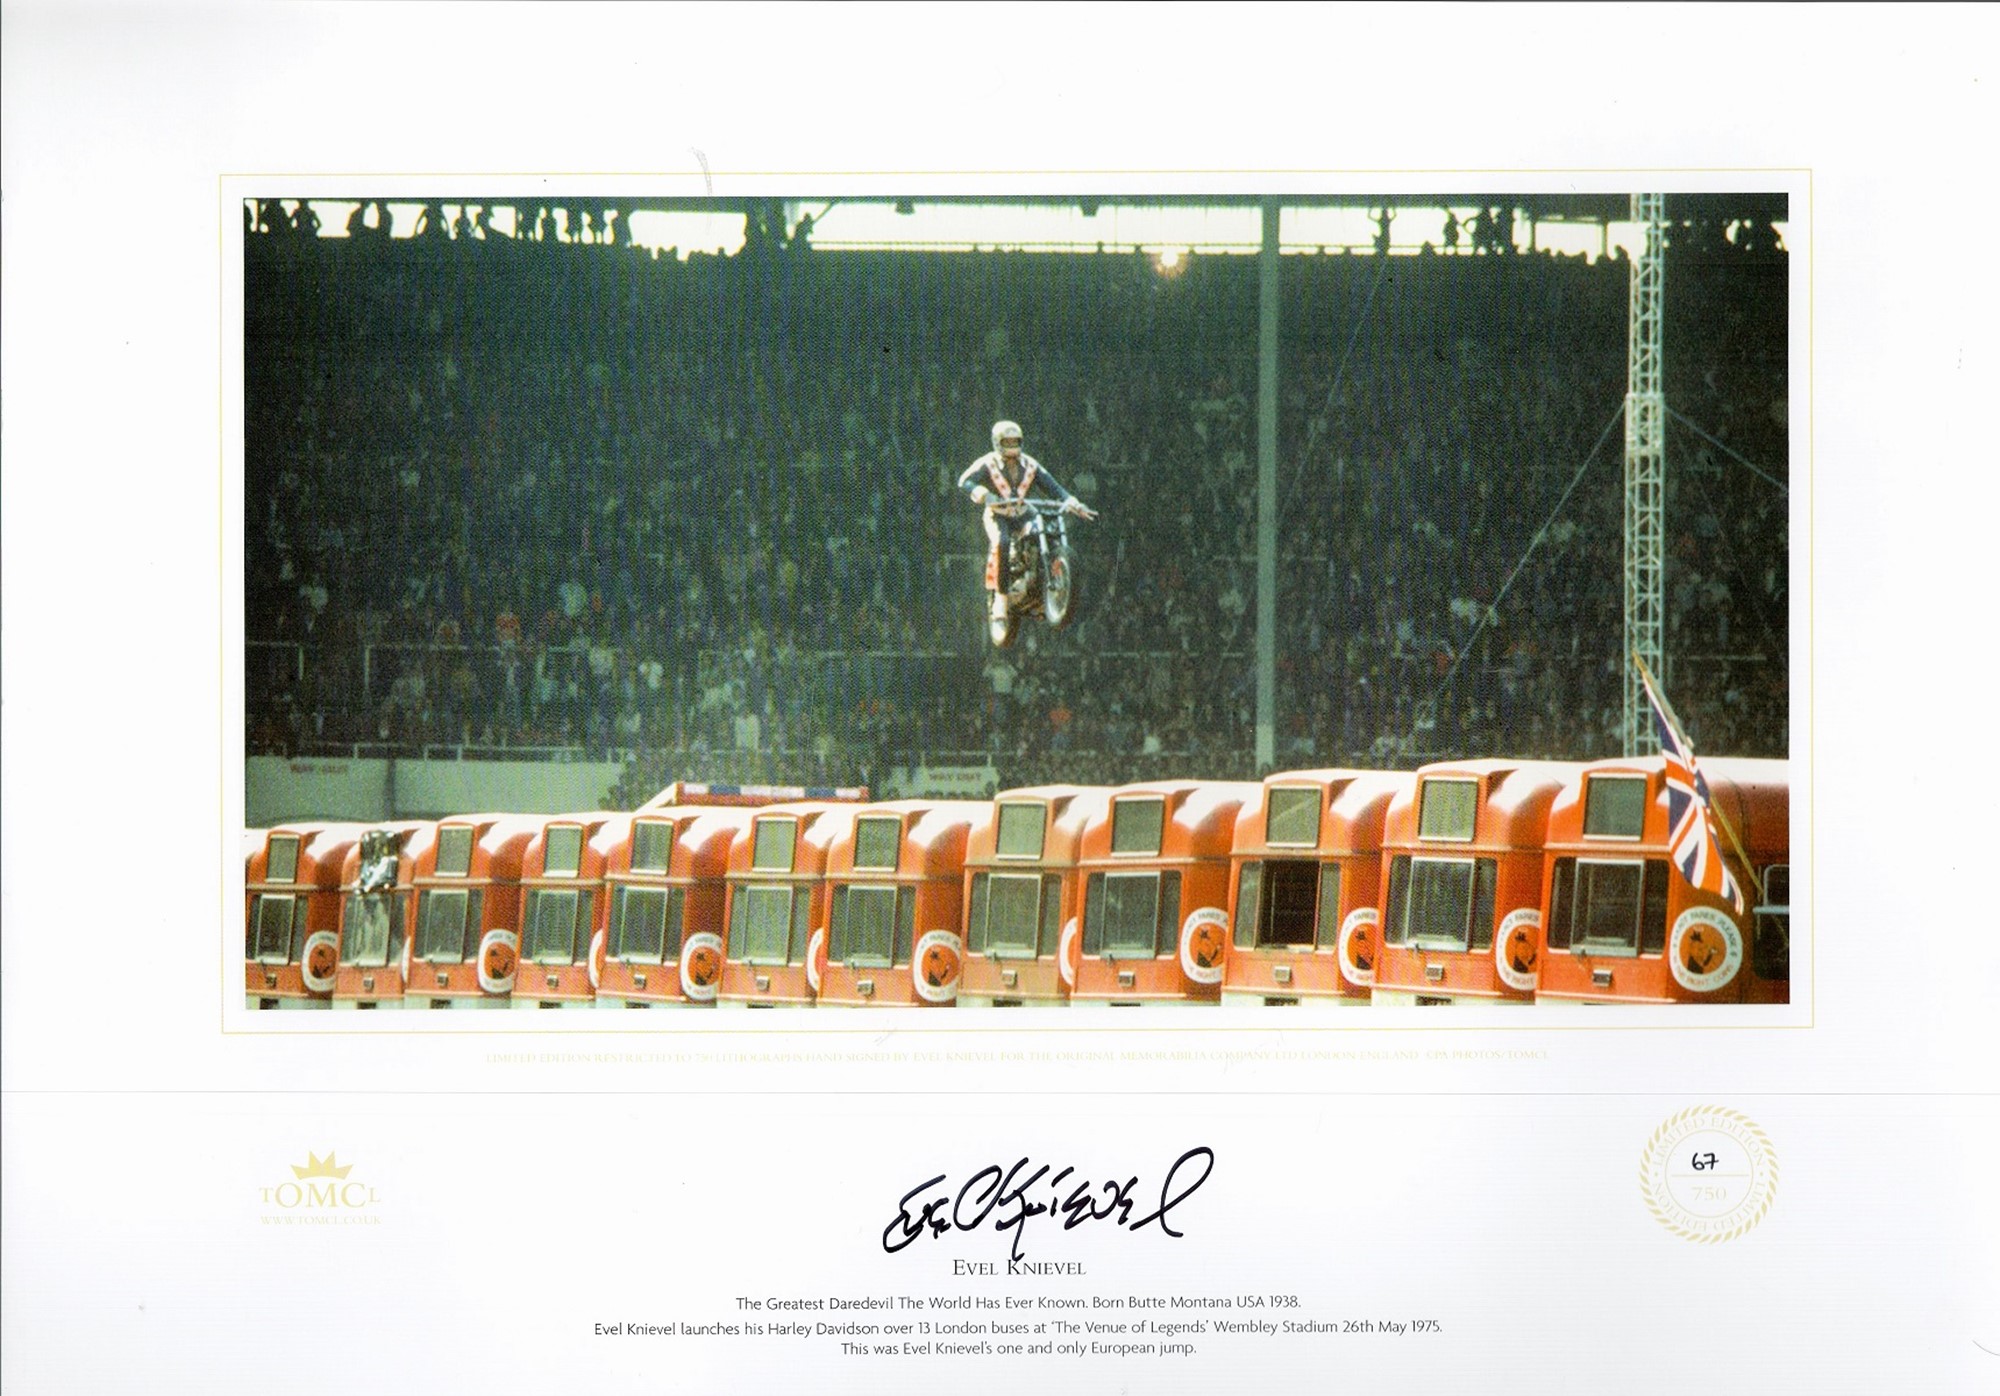 Evel Knievel signed original A3 lithograph print of the 1975 Wembley Stadium jump was exclusively